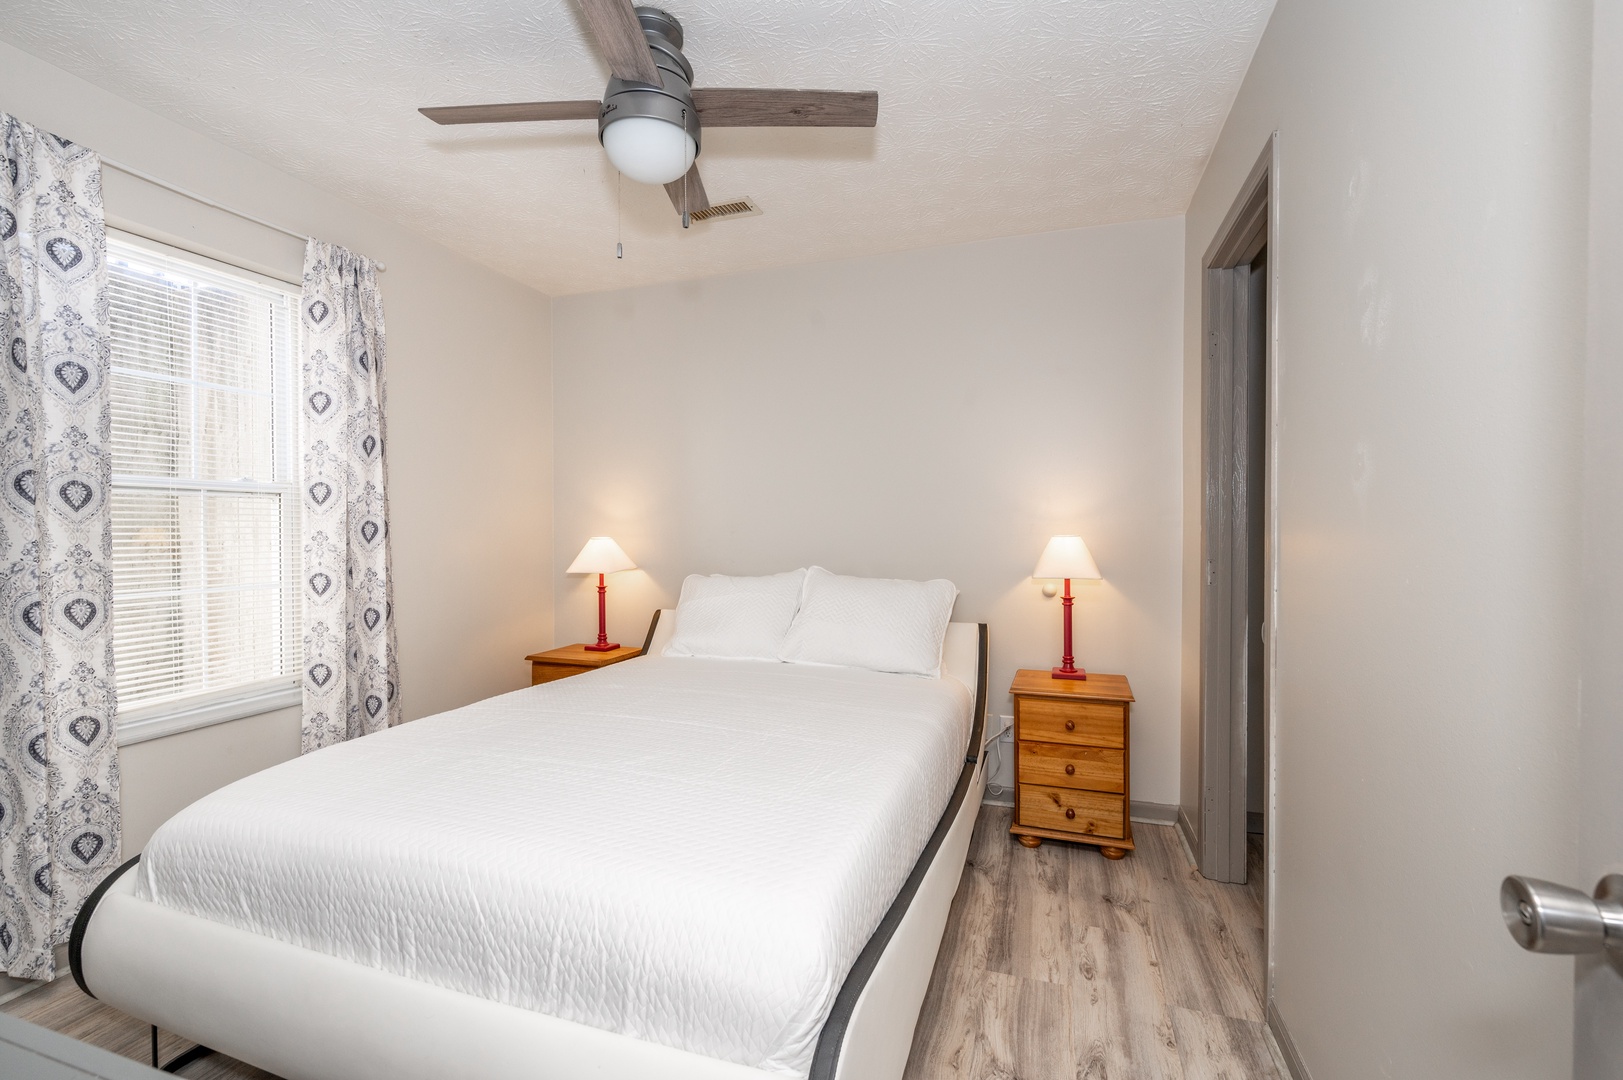 The second bedroom retreat offers a queen-sized bed & Smart TV